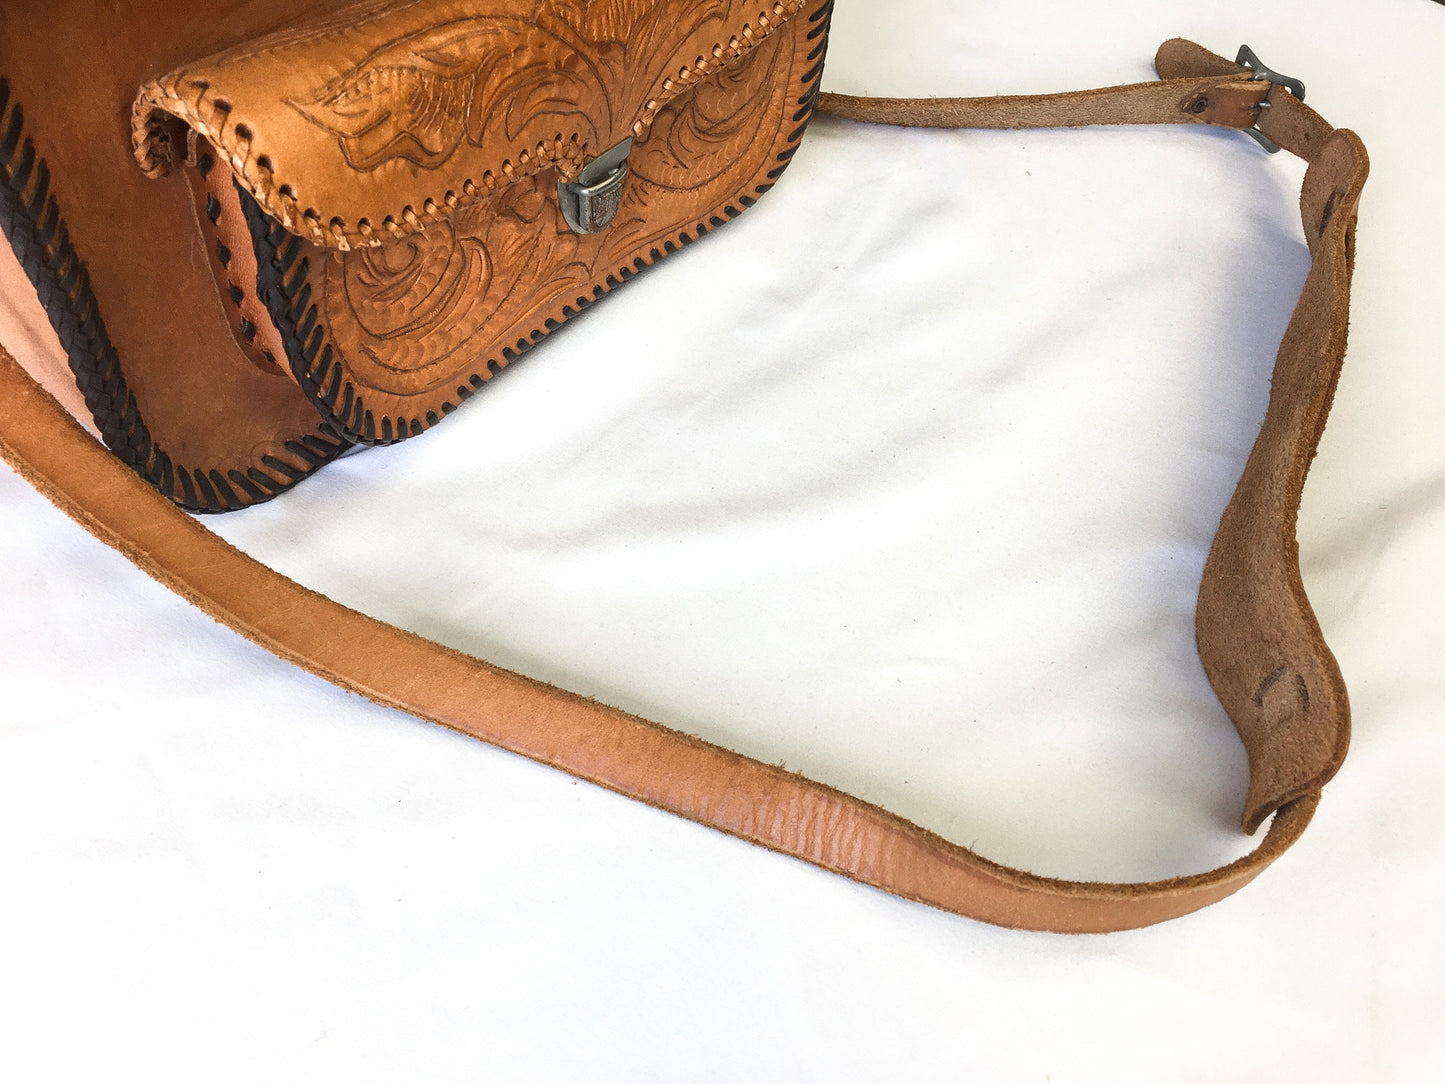 Vintage 70s Handcrafted Large Brown Tooled Leather Purse with Floral Engraving Details